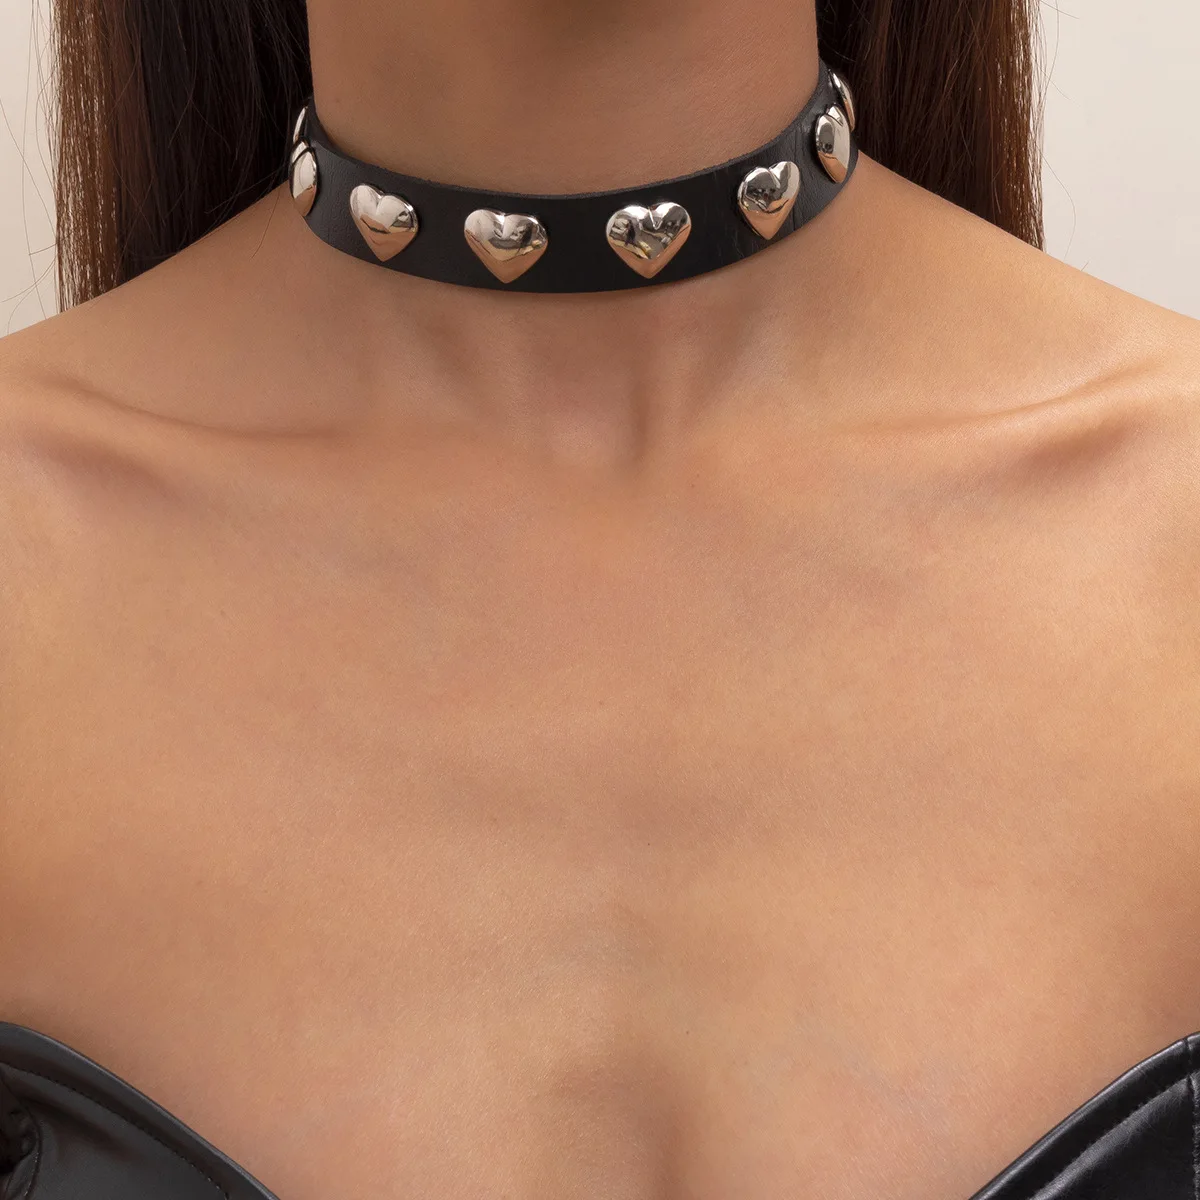 Wholesale Punk Cool Style Pu Leather Collar Choker Necklace Gothic Emo Love  Heart Rivet Collier Necklace for Women Girls Men Accessory From  m.